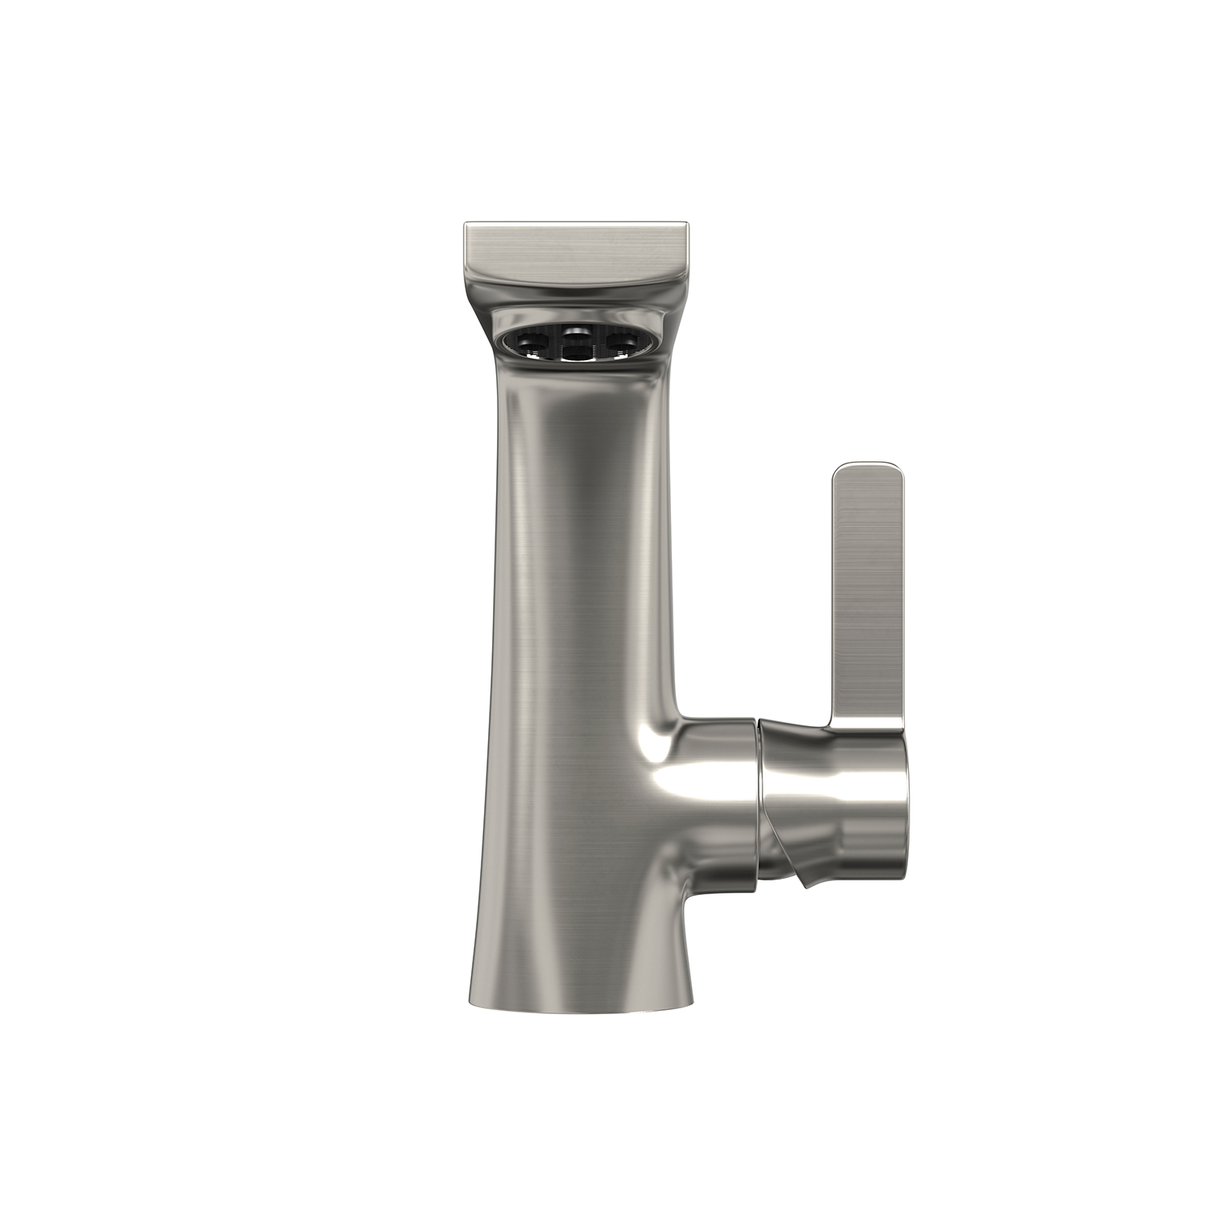 DAX Brass Single Handle Bathroom Faucet Spout, 16", Brushed Nickel DAX-8226-BN